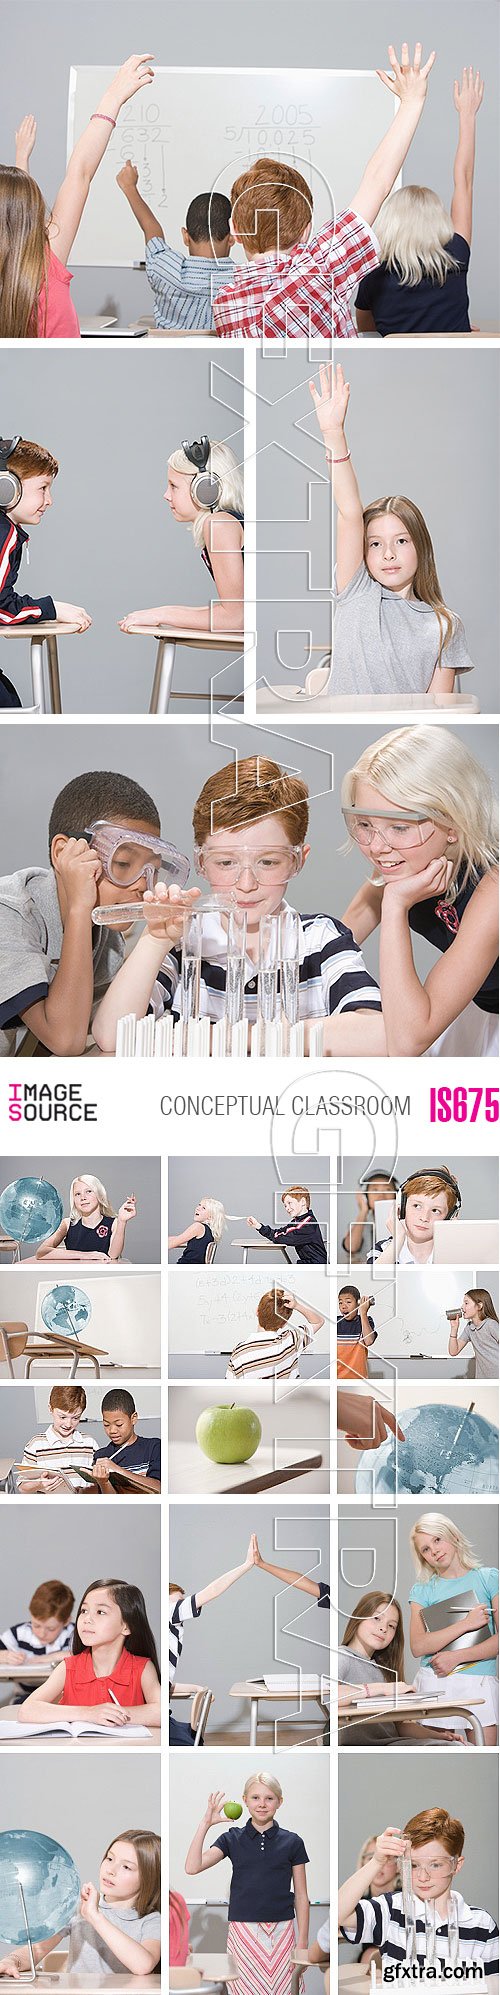 Image Source IS675 Conceptual Classroom